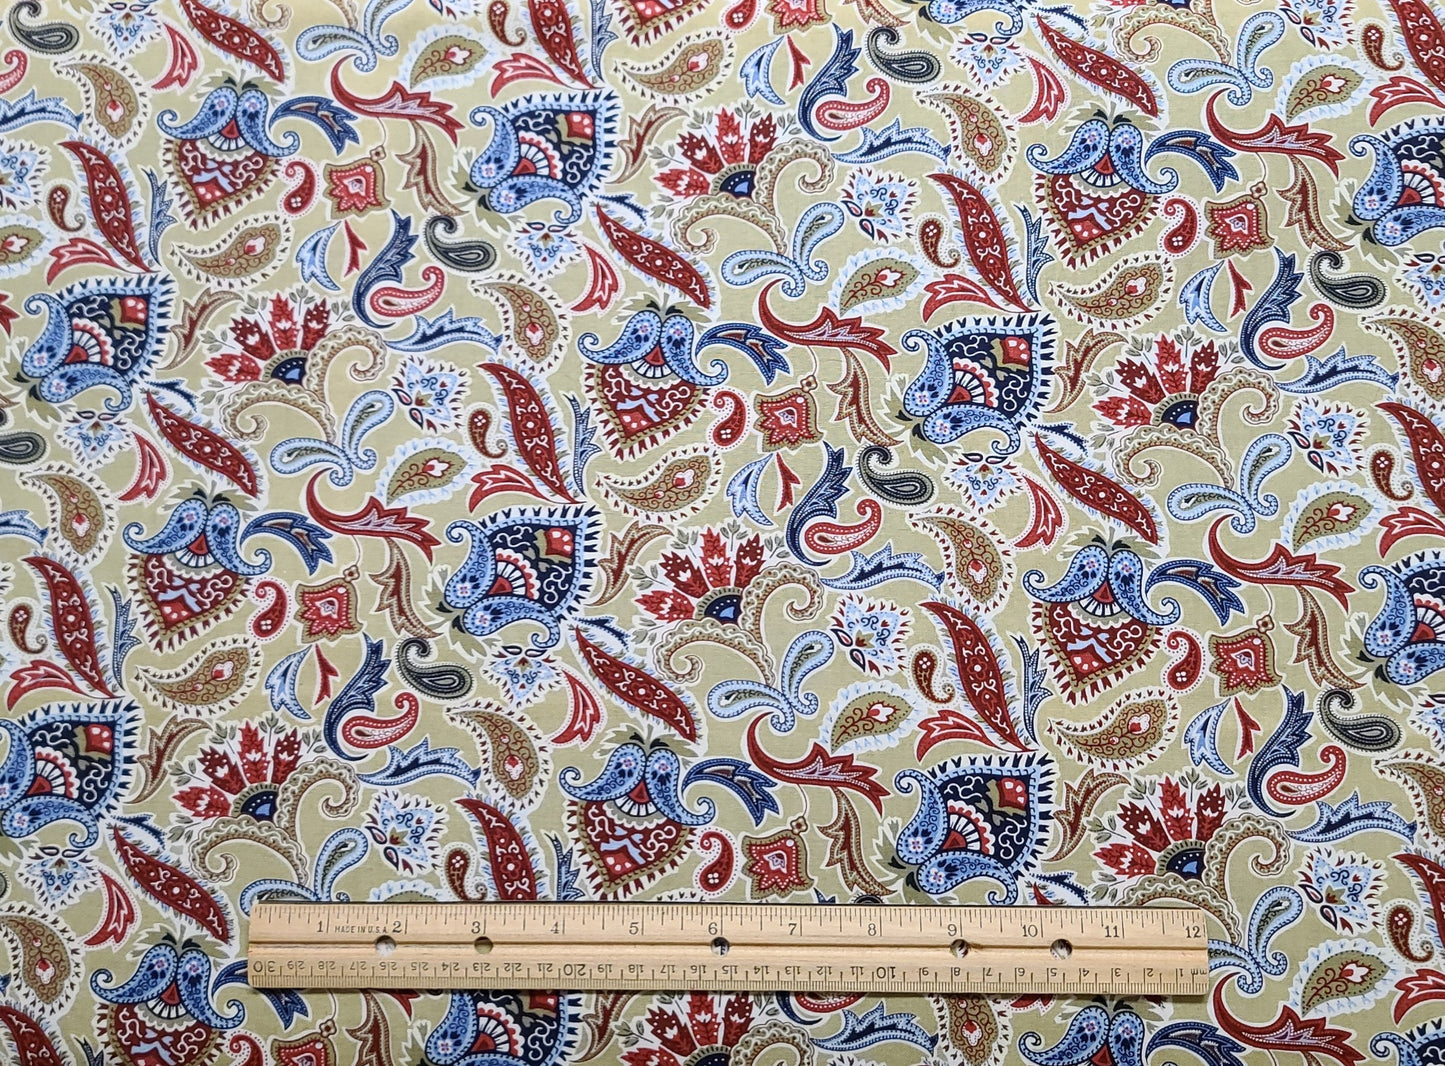 JoAnn Fabric - Khaki Fabric / White, Red and Blue Paisley, Feather and Heart Print